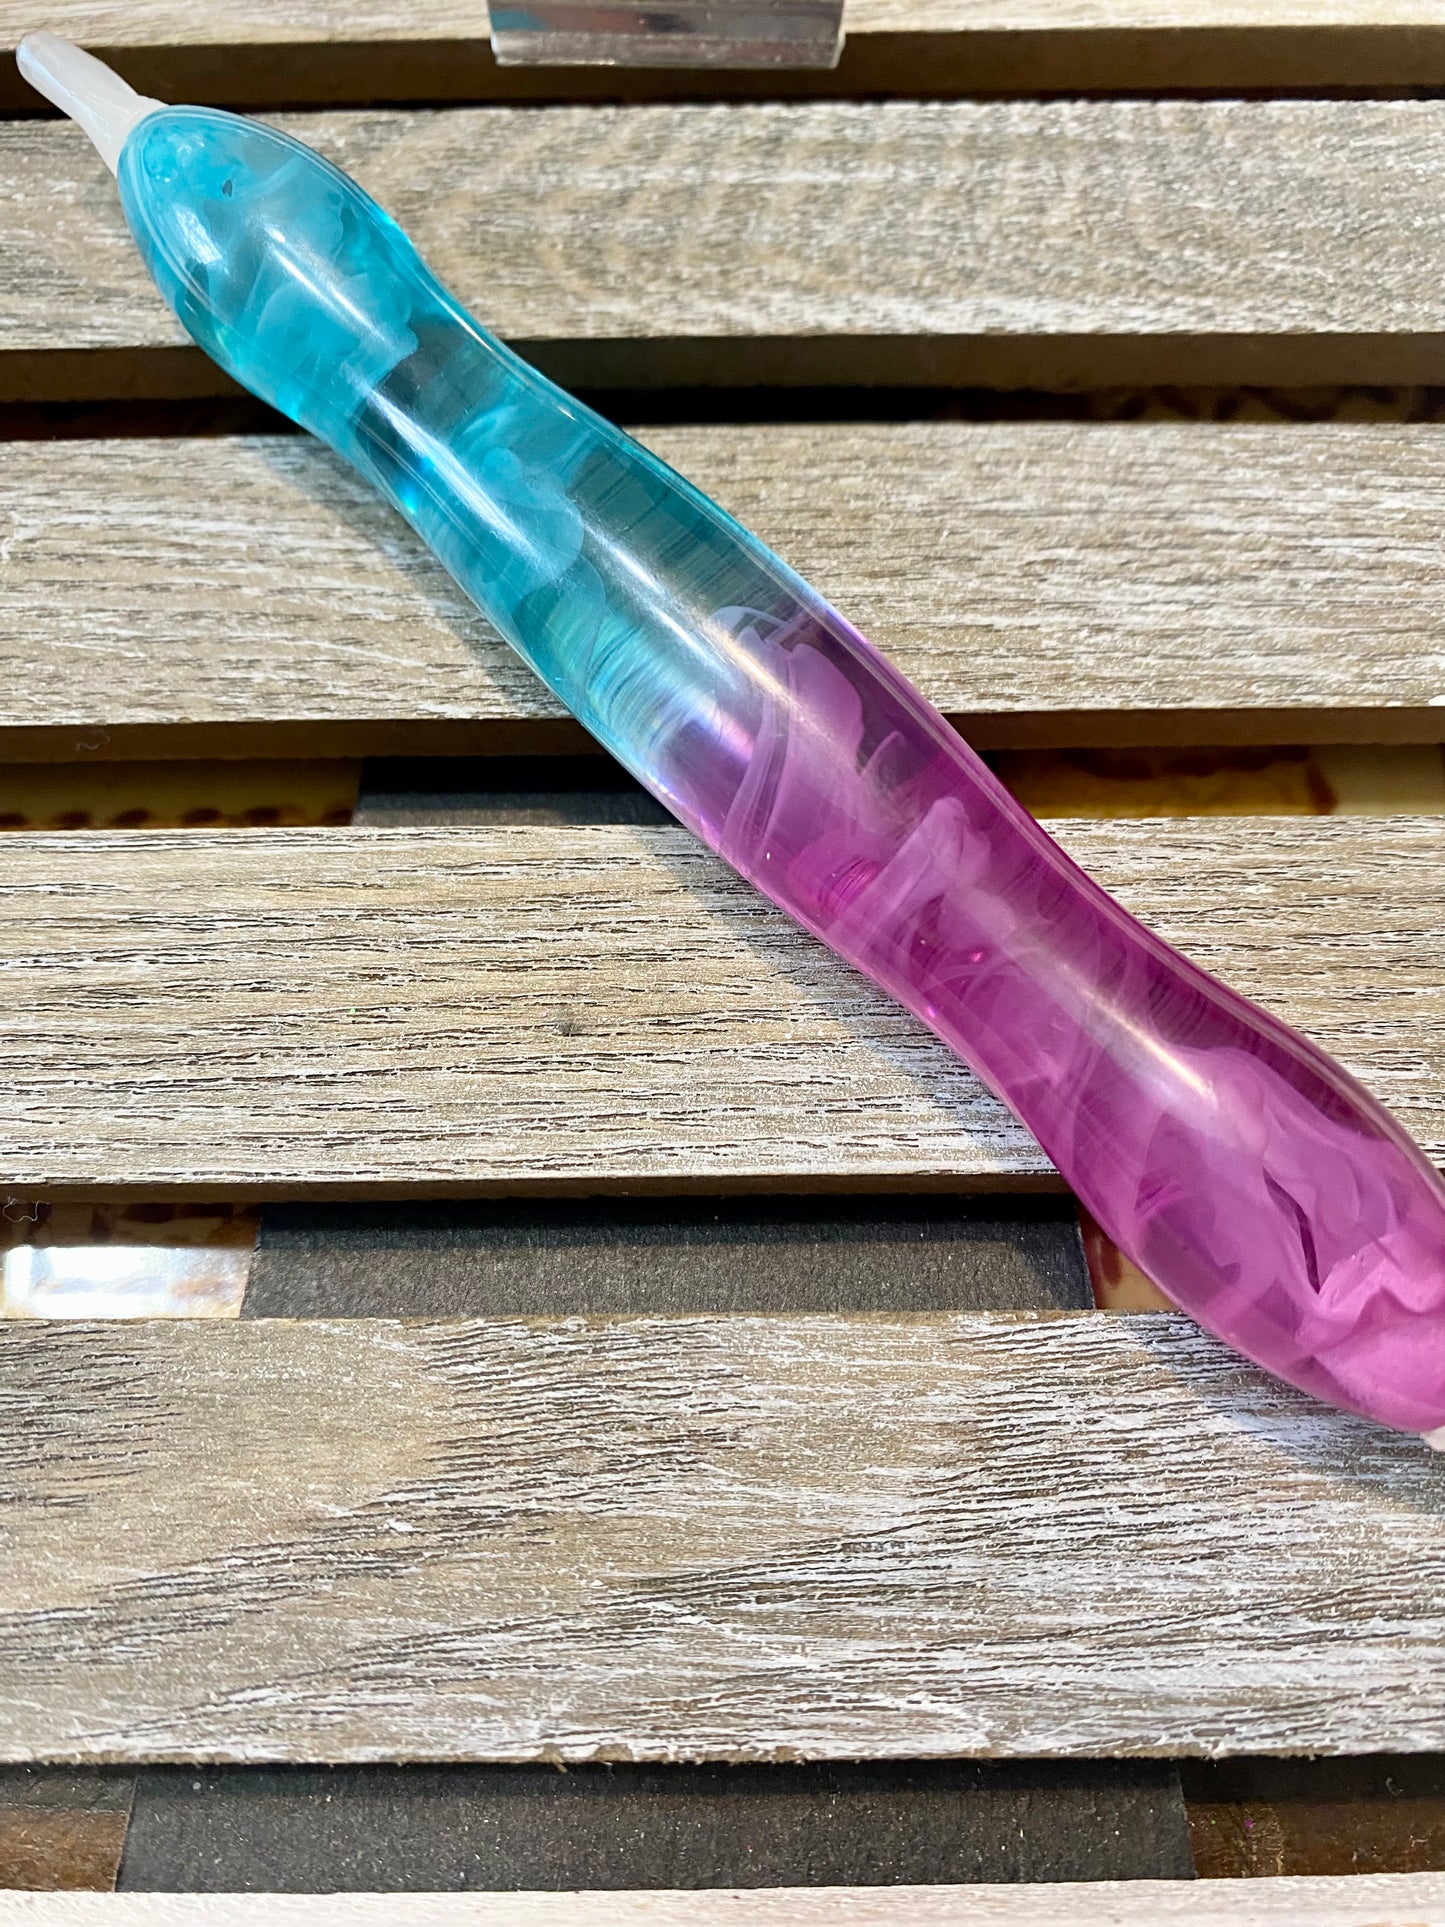 Resin Diamond Painting Pens with 3 Plastic tips